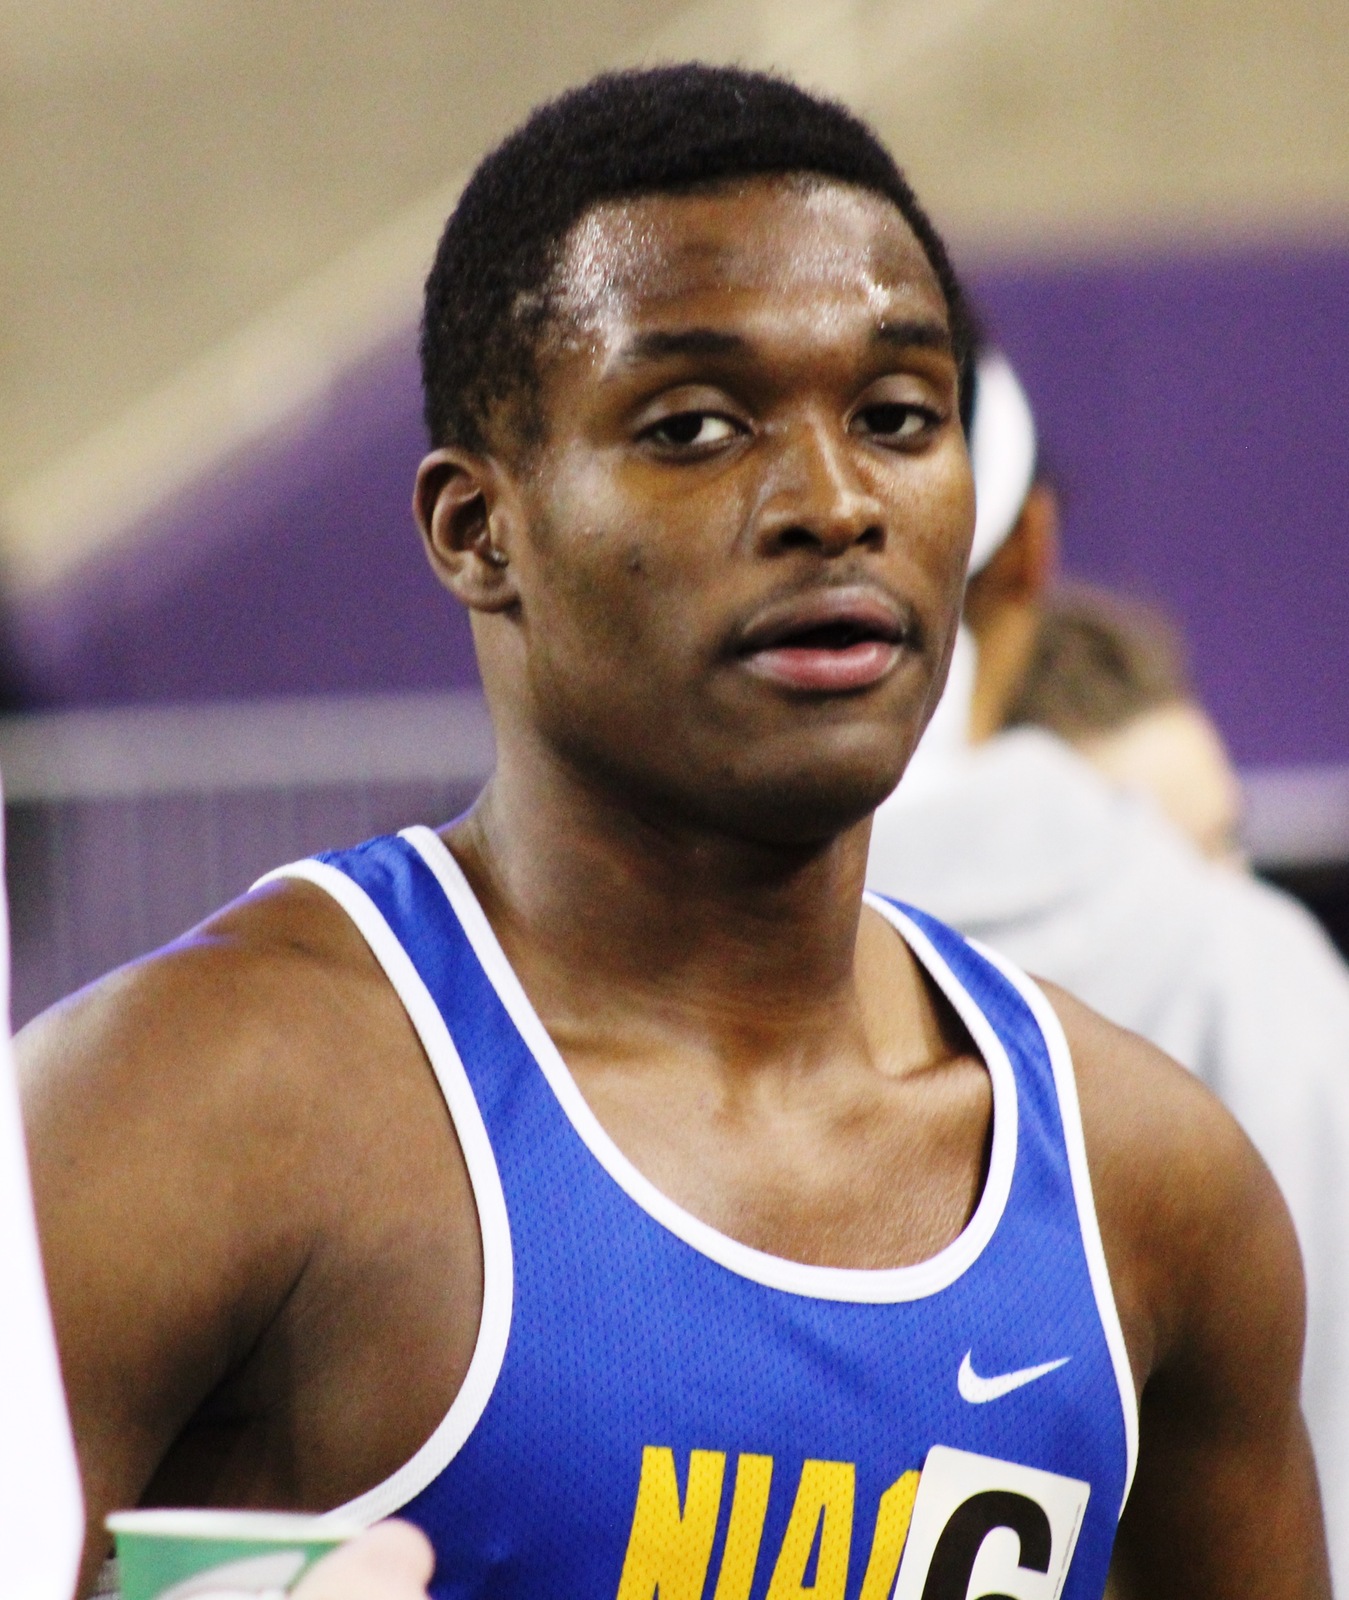 NIACC's David Carter won the 600-meter dash at the Jack Jennett Invitational last Friday at the UNI-Dome in Cedar Falls.